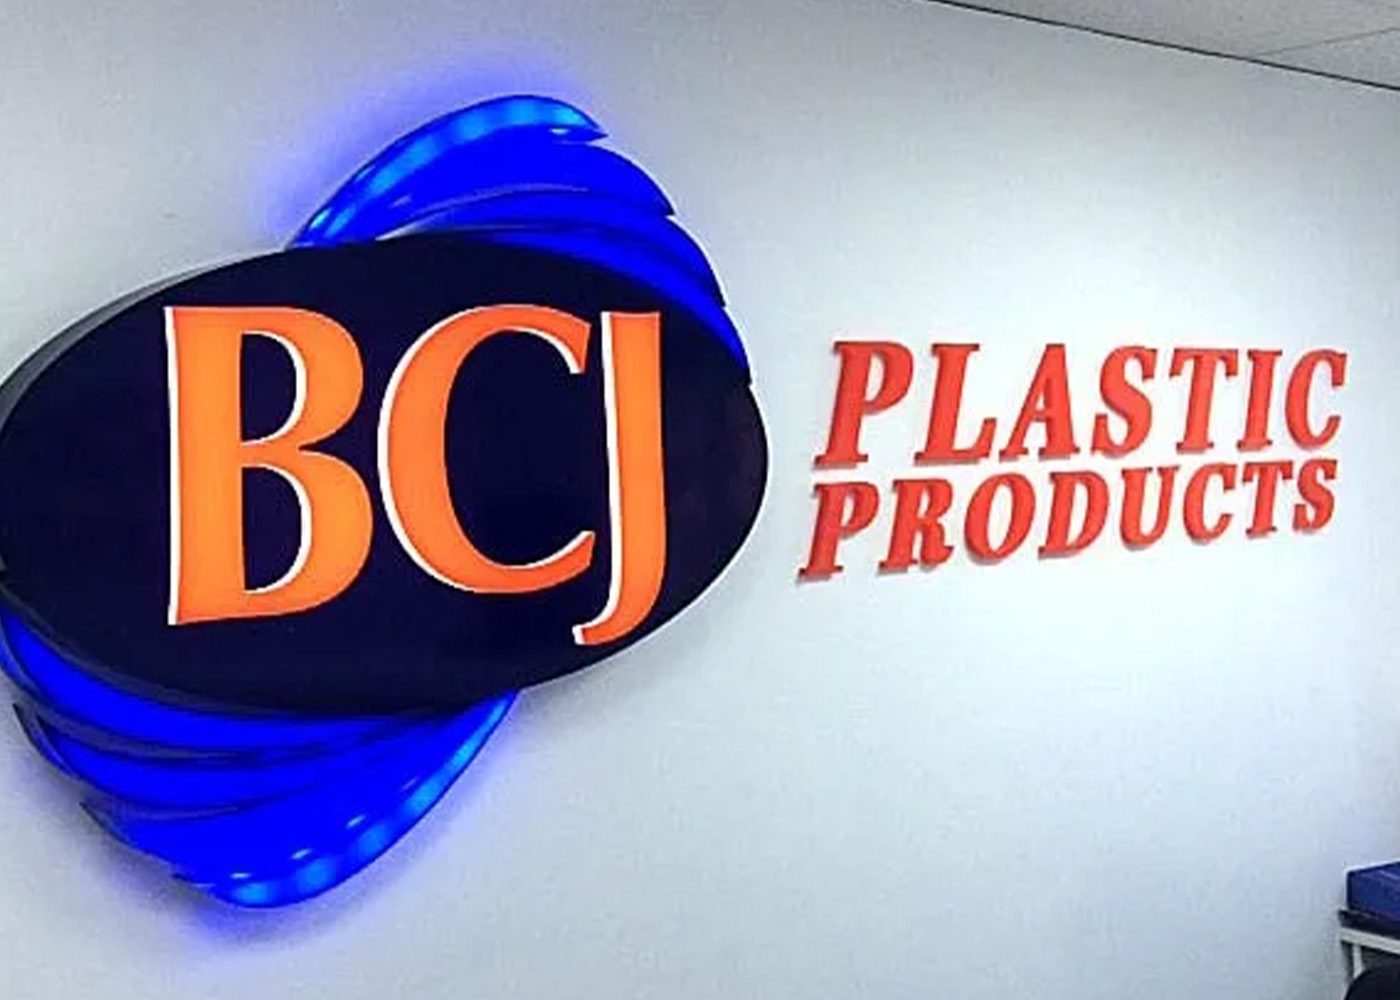 BCJ plastic products sign.